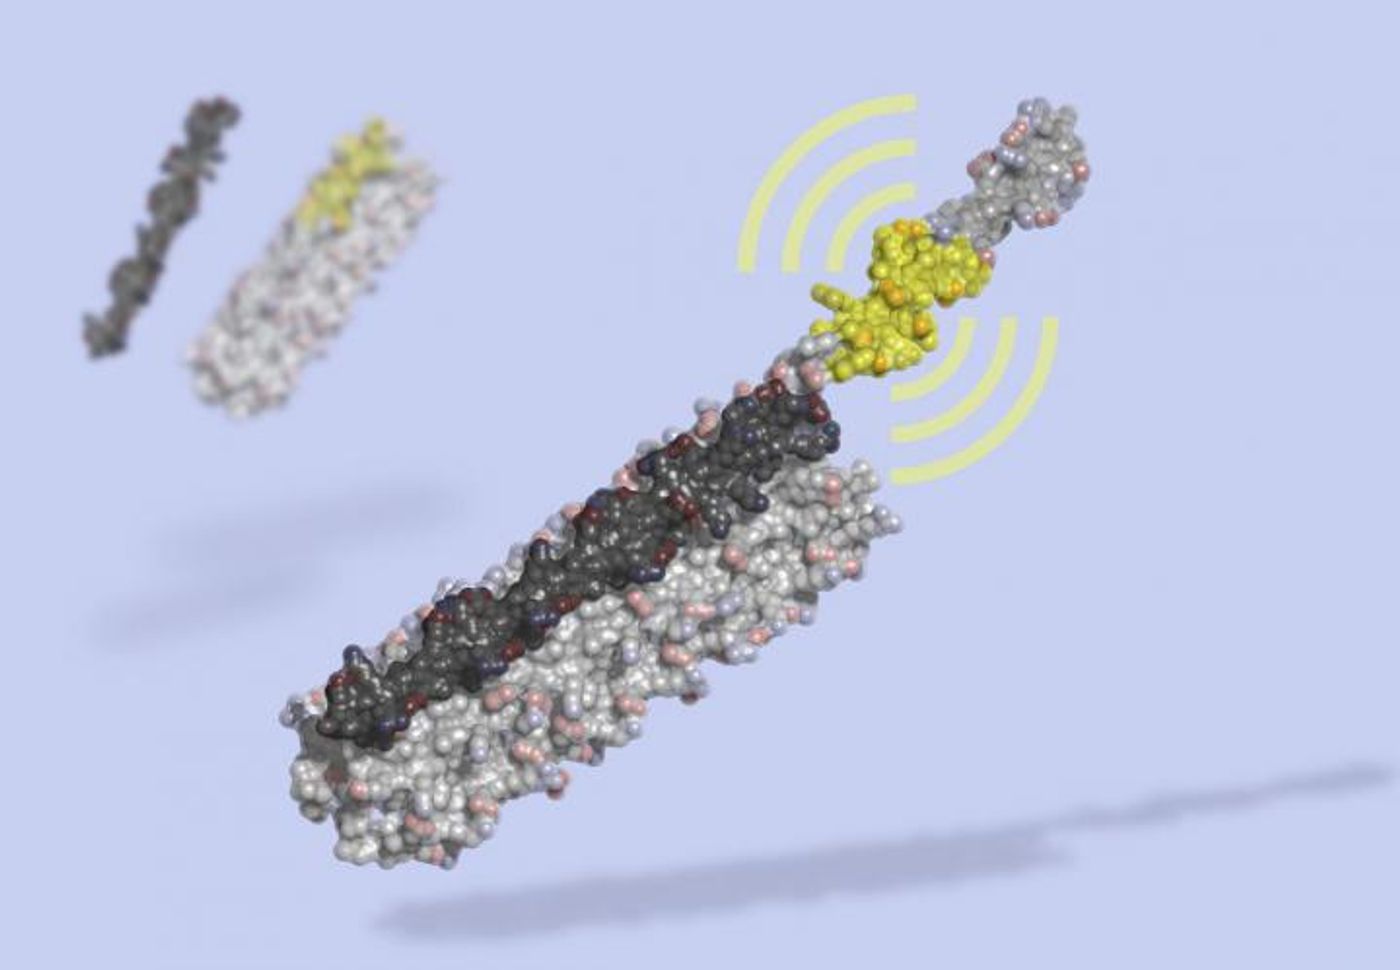 LOCKR is a molecular switch made of multiple interacting parts: a 'key' (black) unlocks a 'cage' (grey), revealing a bioactive peptide (yellow) which can interact with other molecules in the cell. LOCKR, a synthetic protein complex, was computationally designed from scratch, then tested in living cells. / Credit: Ian Haydon, UW Medicine Institute for Protein Design